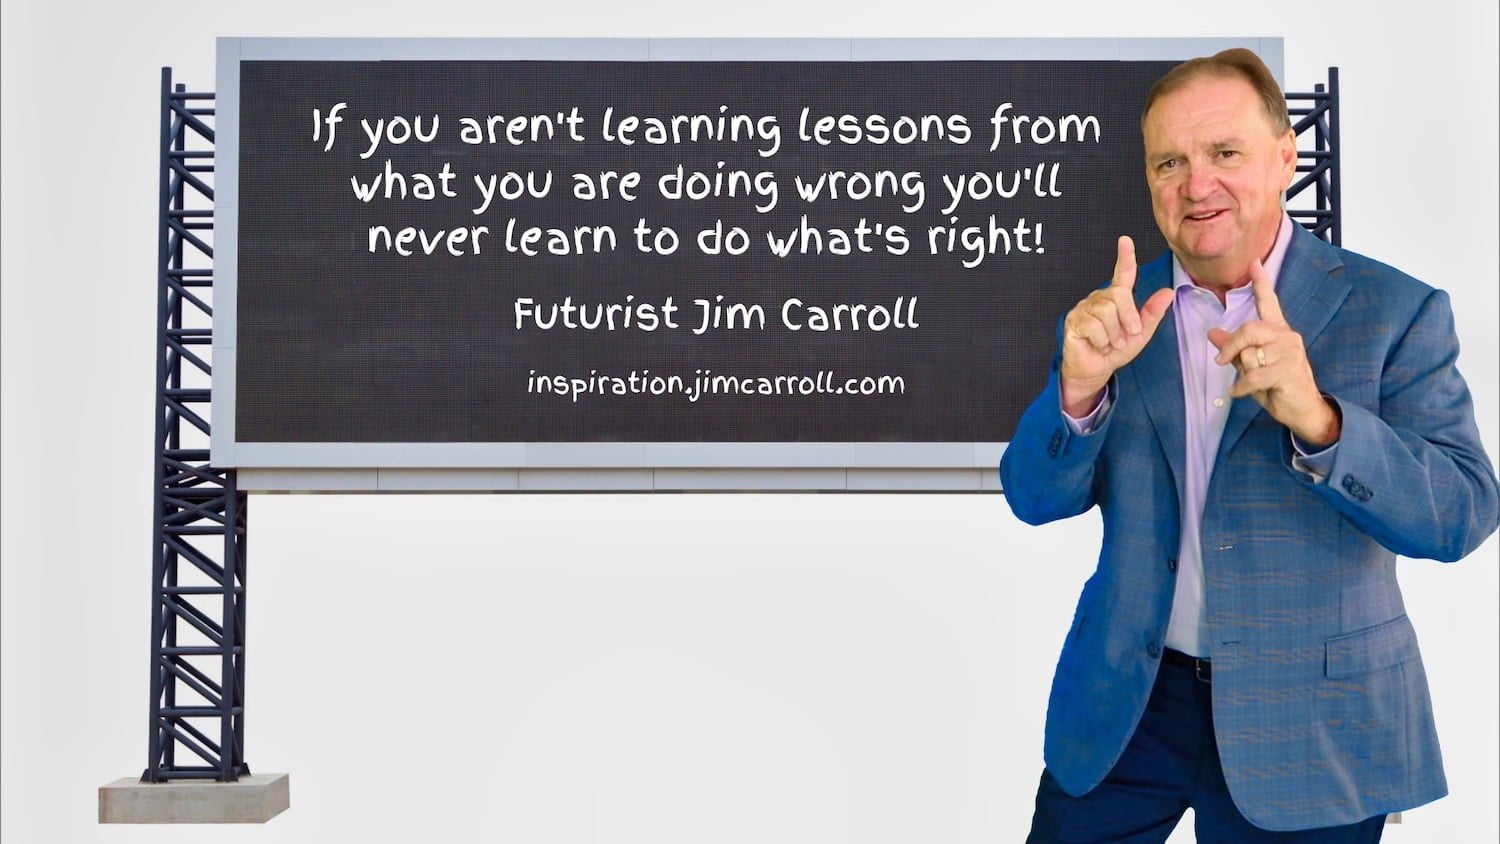 Daily Inspiration: "If you aren't learning lessons from what you are doing wrong you'll never learn to do what's right!"